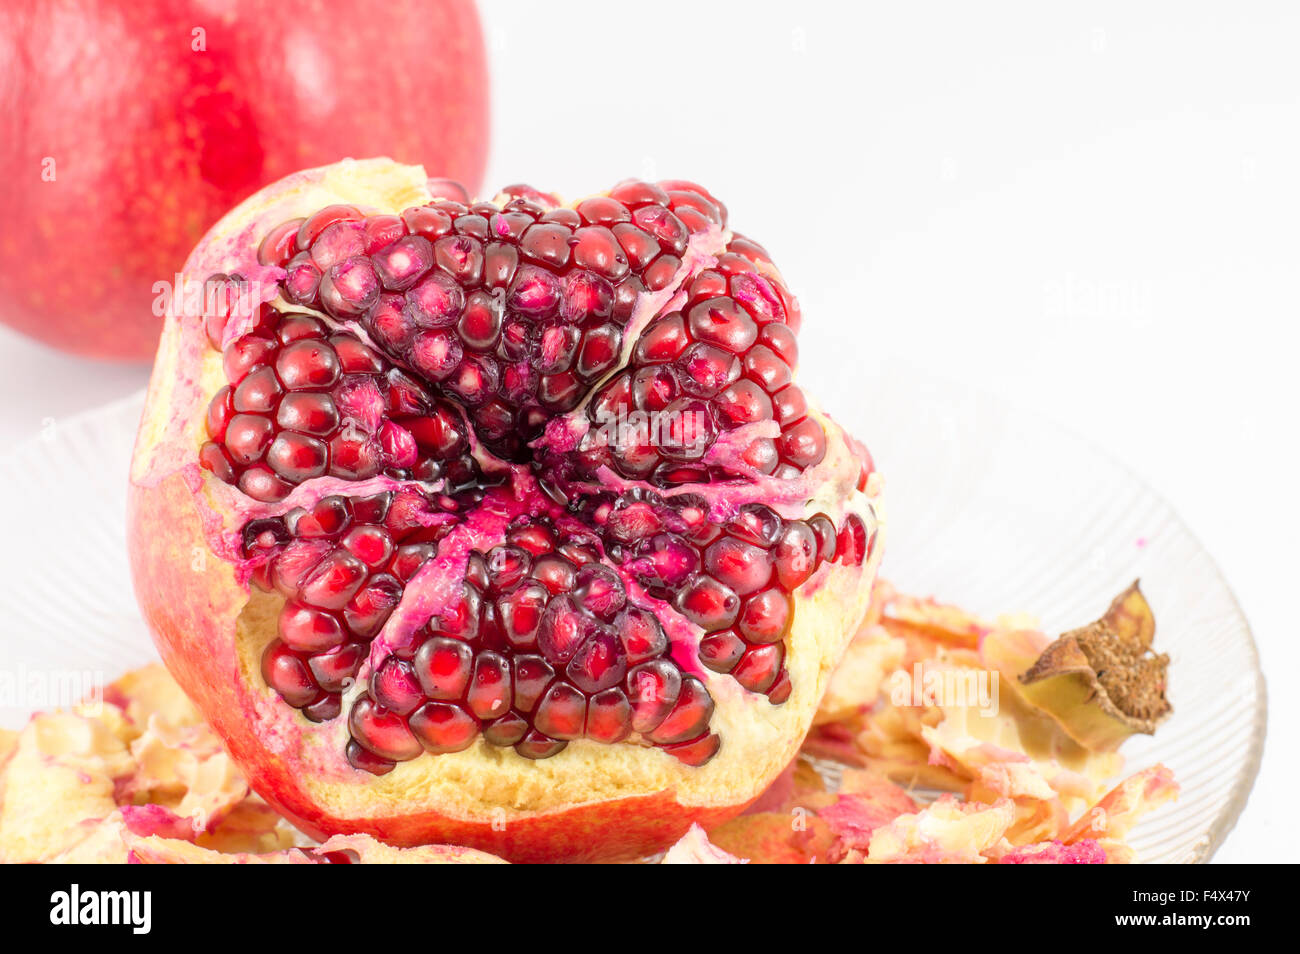 Juicy pomegranate partially peeled on a plate on white background Stock Photo